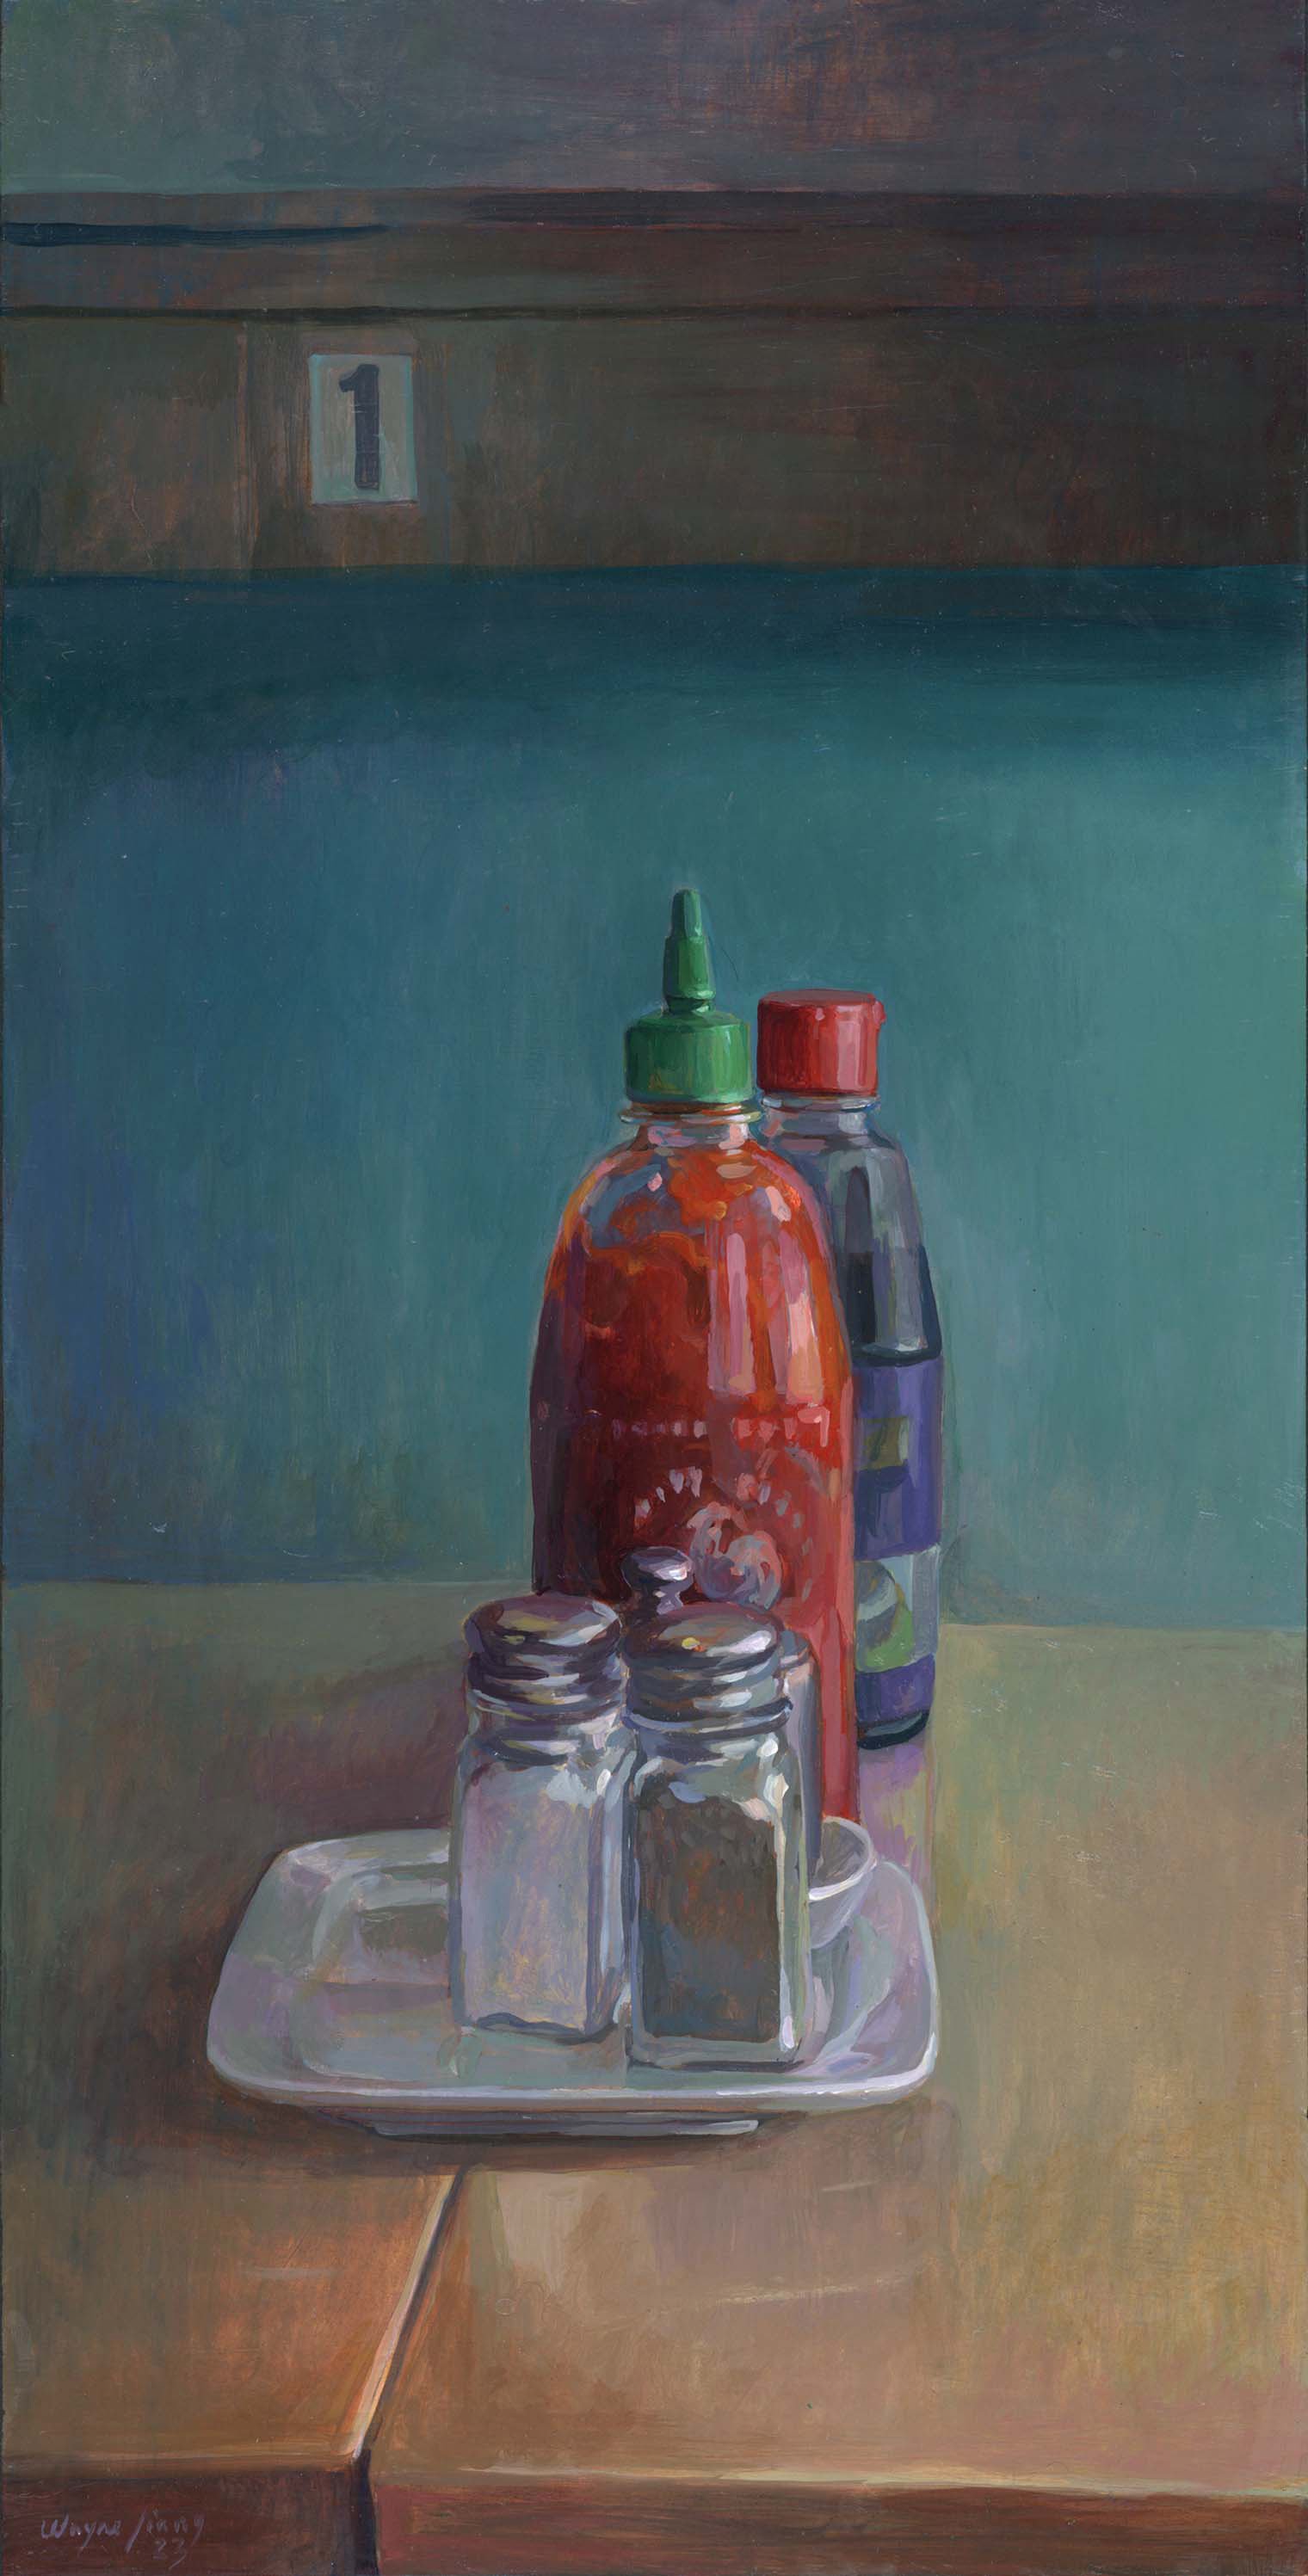 Condiments in Booth #1 by Wayne Jiang